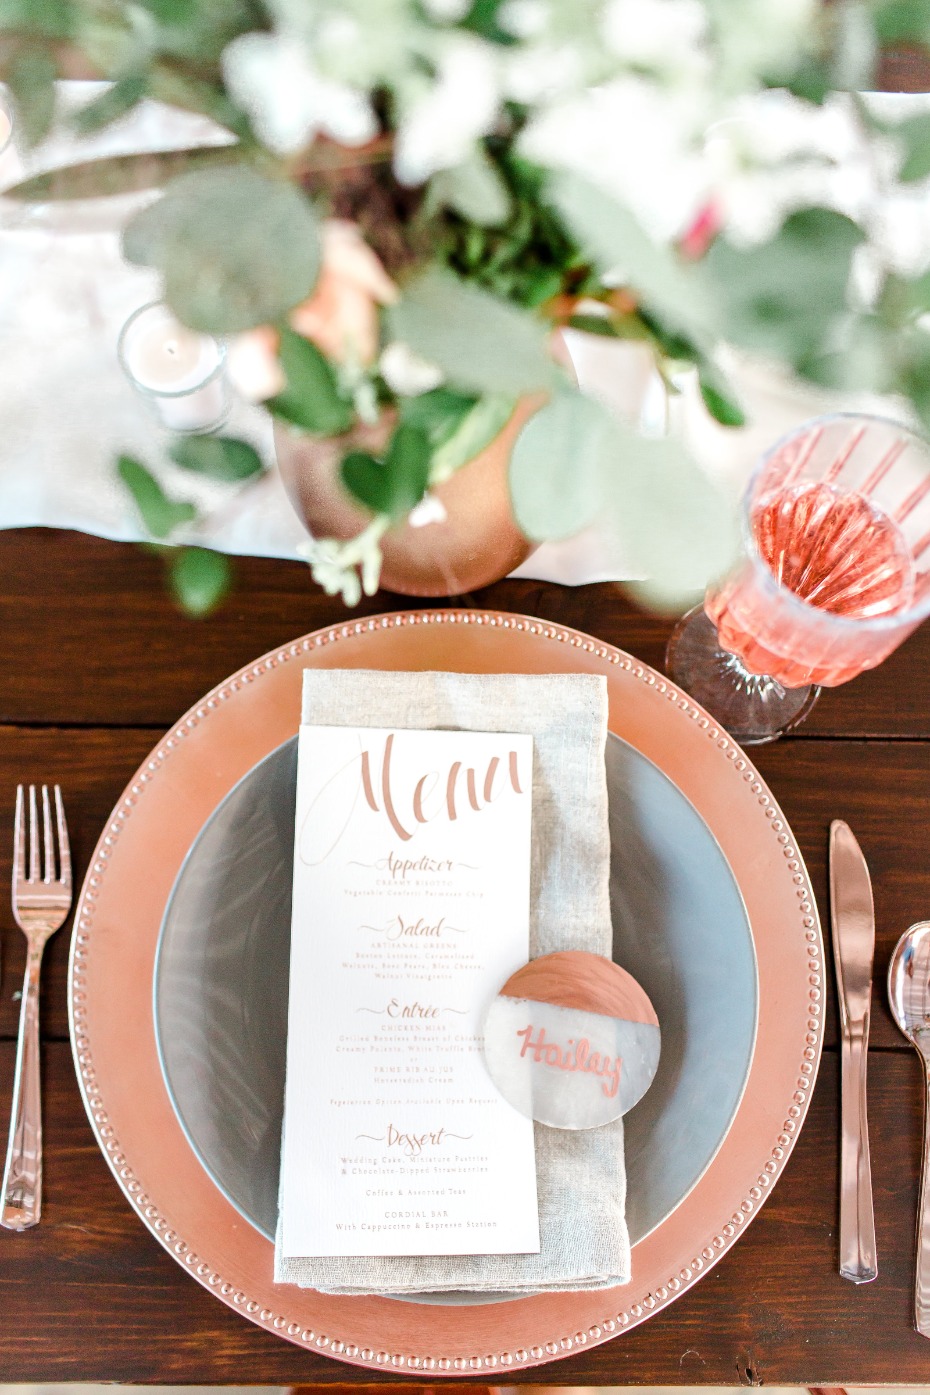 Rose gold place setting for a wedding